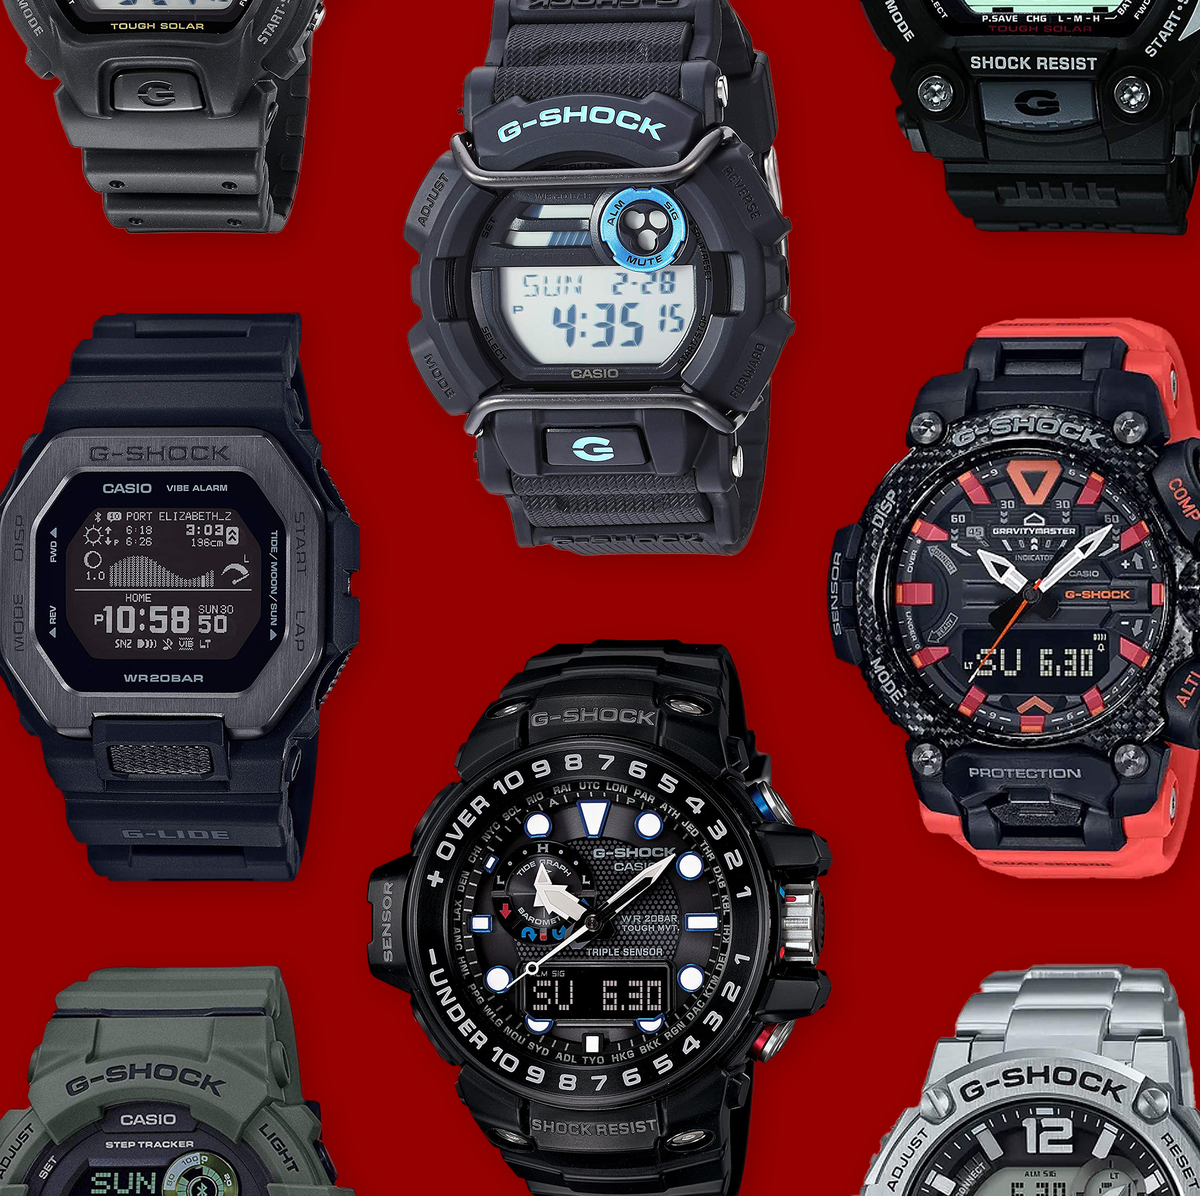 Complete Buying Guide to G-Shock